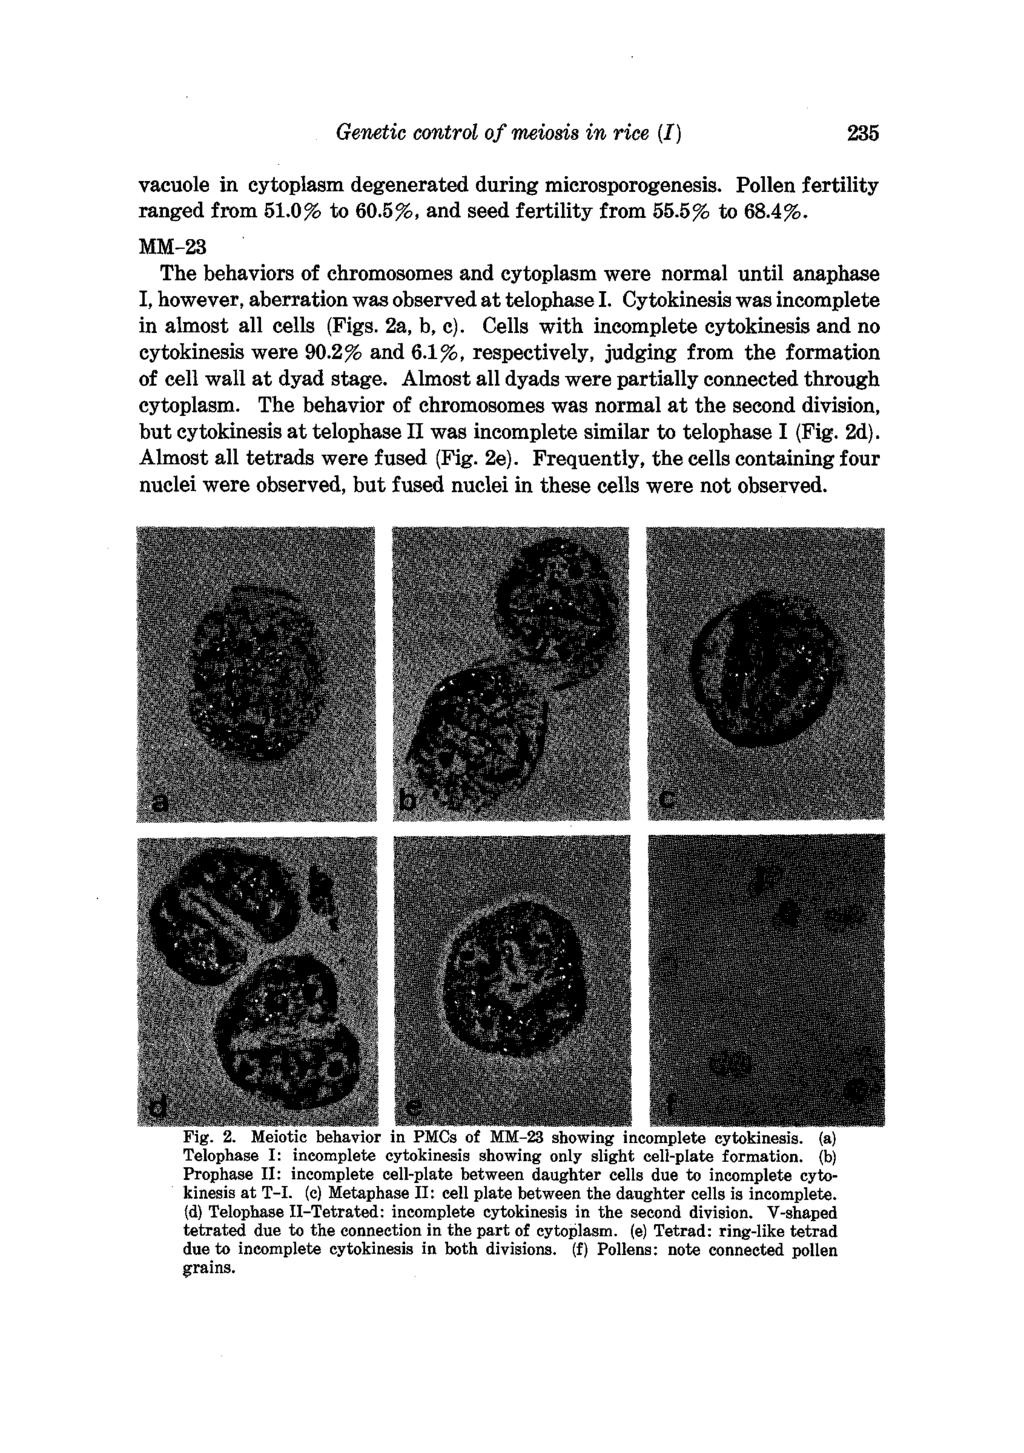 Genetic control of meiosis in rice (I) 235 vacuole in cytoplasm degenerated during microsporogenesis. Pollen fertility ranged from 51.0% to 60.5%, and seed fertility from 55.5% to 68.4%.